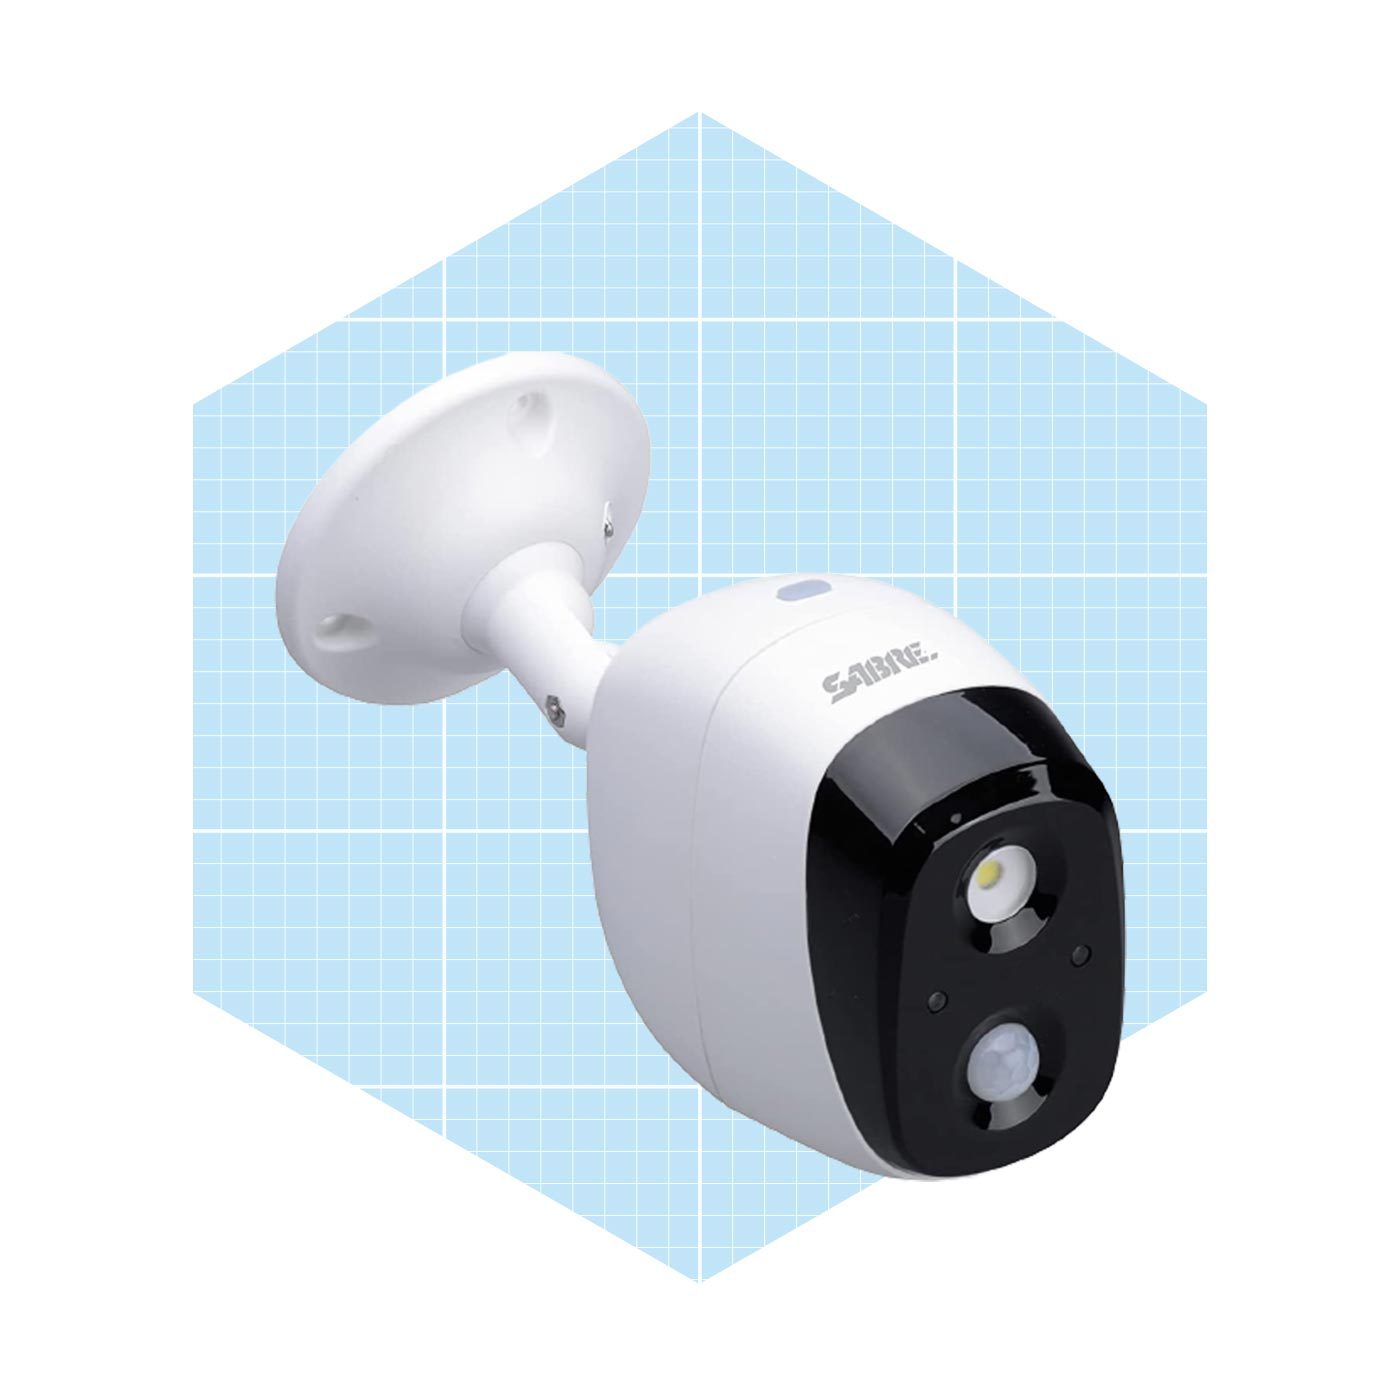 Sabre 2 In 1 Motion Sensor Alarm And Light With Fake Security Camera